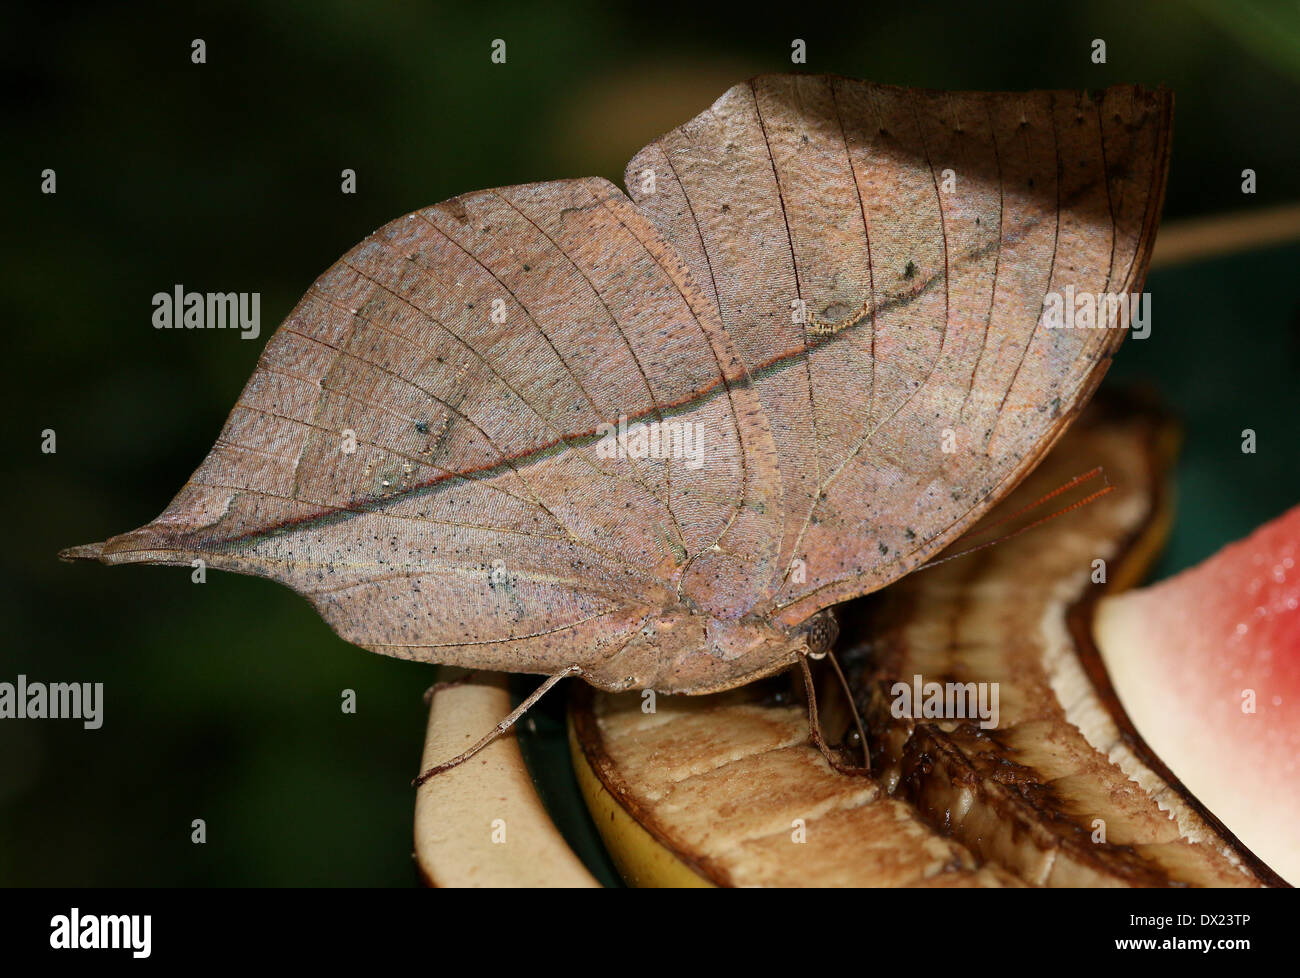 Orange Oakleaf or Dead Leaf Butterfly (Kallima inachus) with wings closed, feeding on a banana Stock Photo